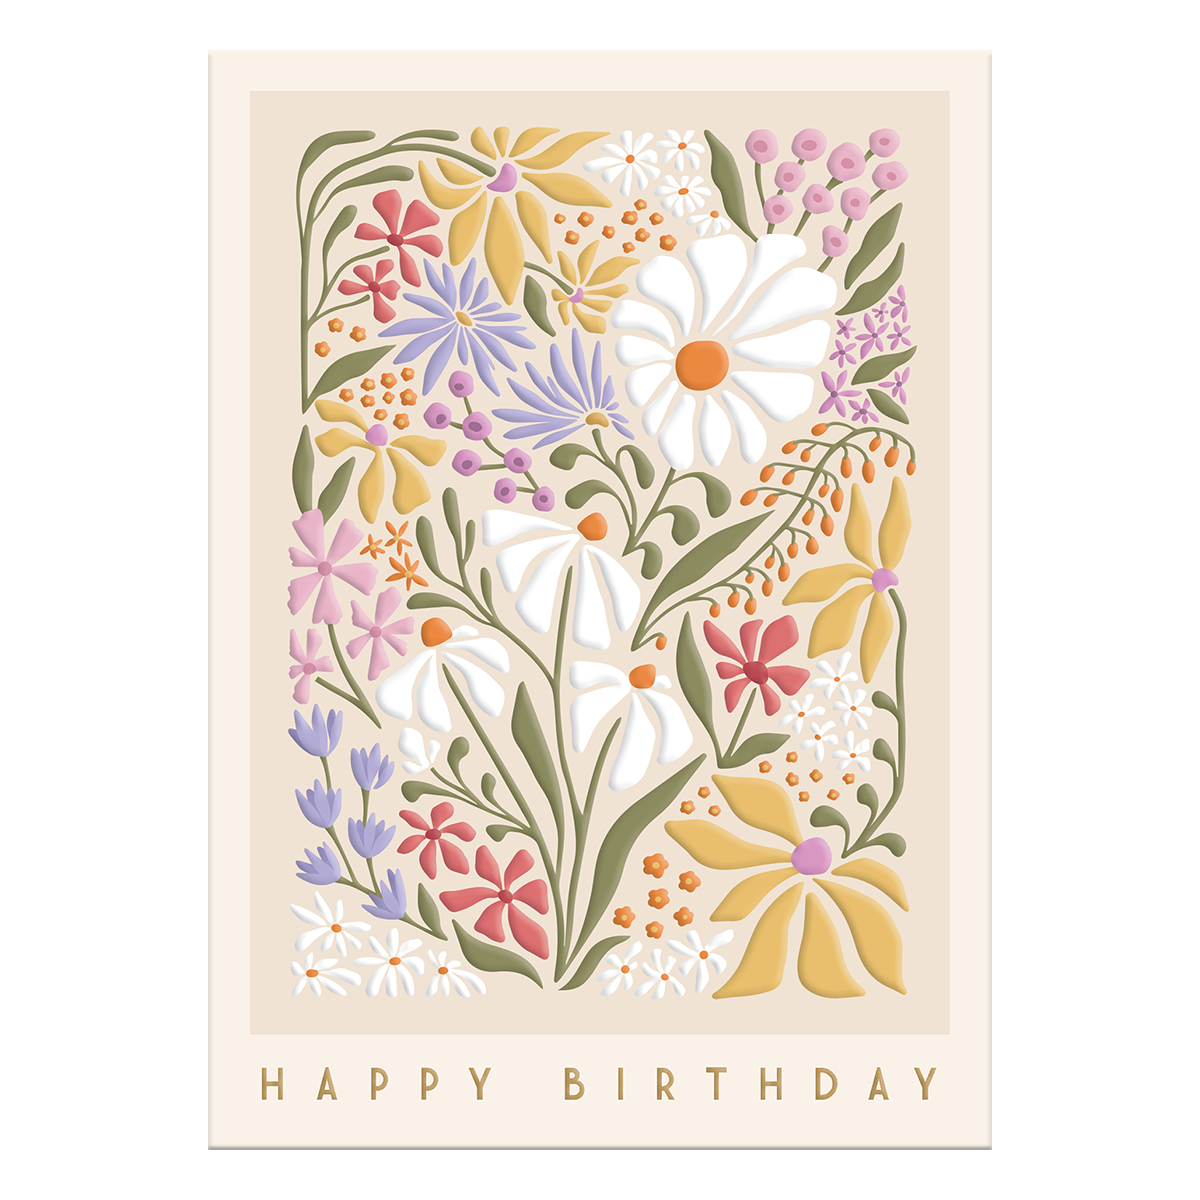 Wildflowers Greeting Card Product